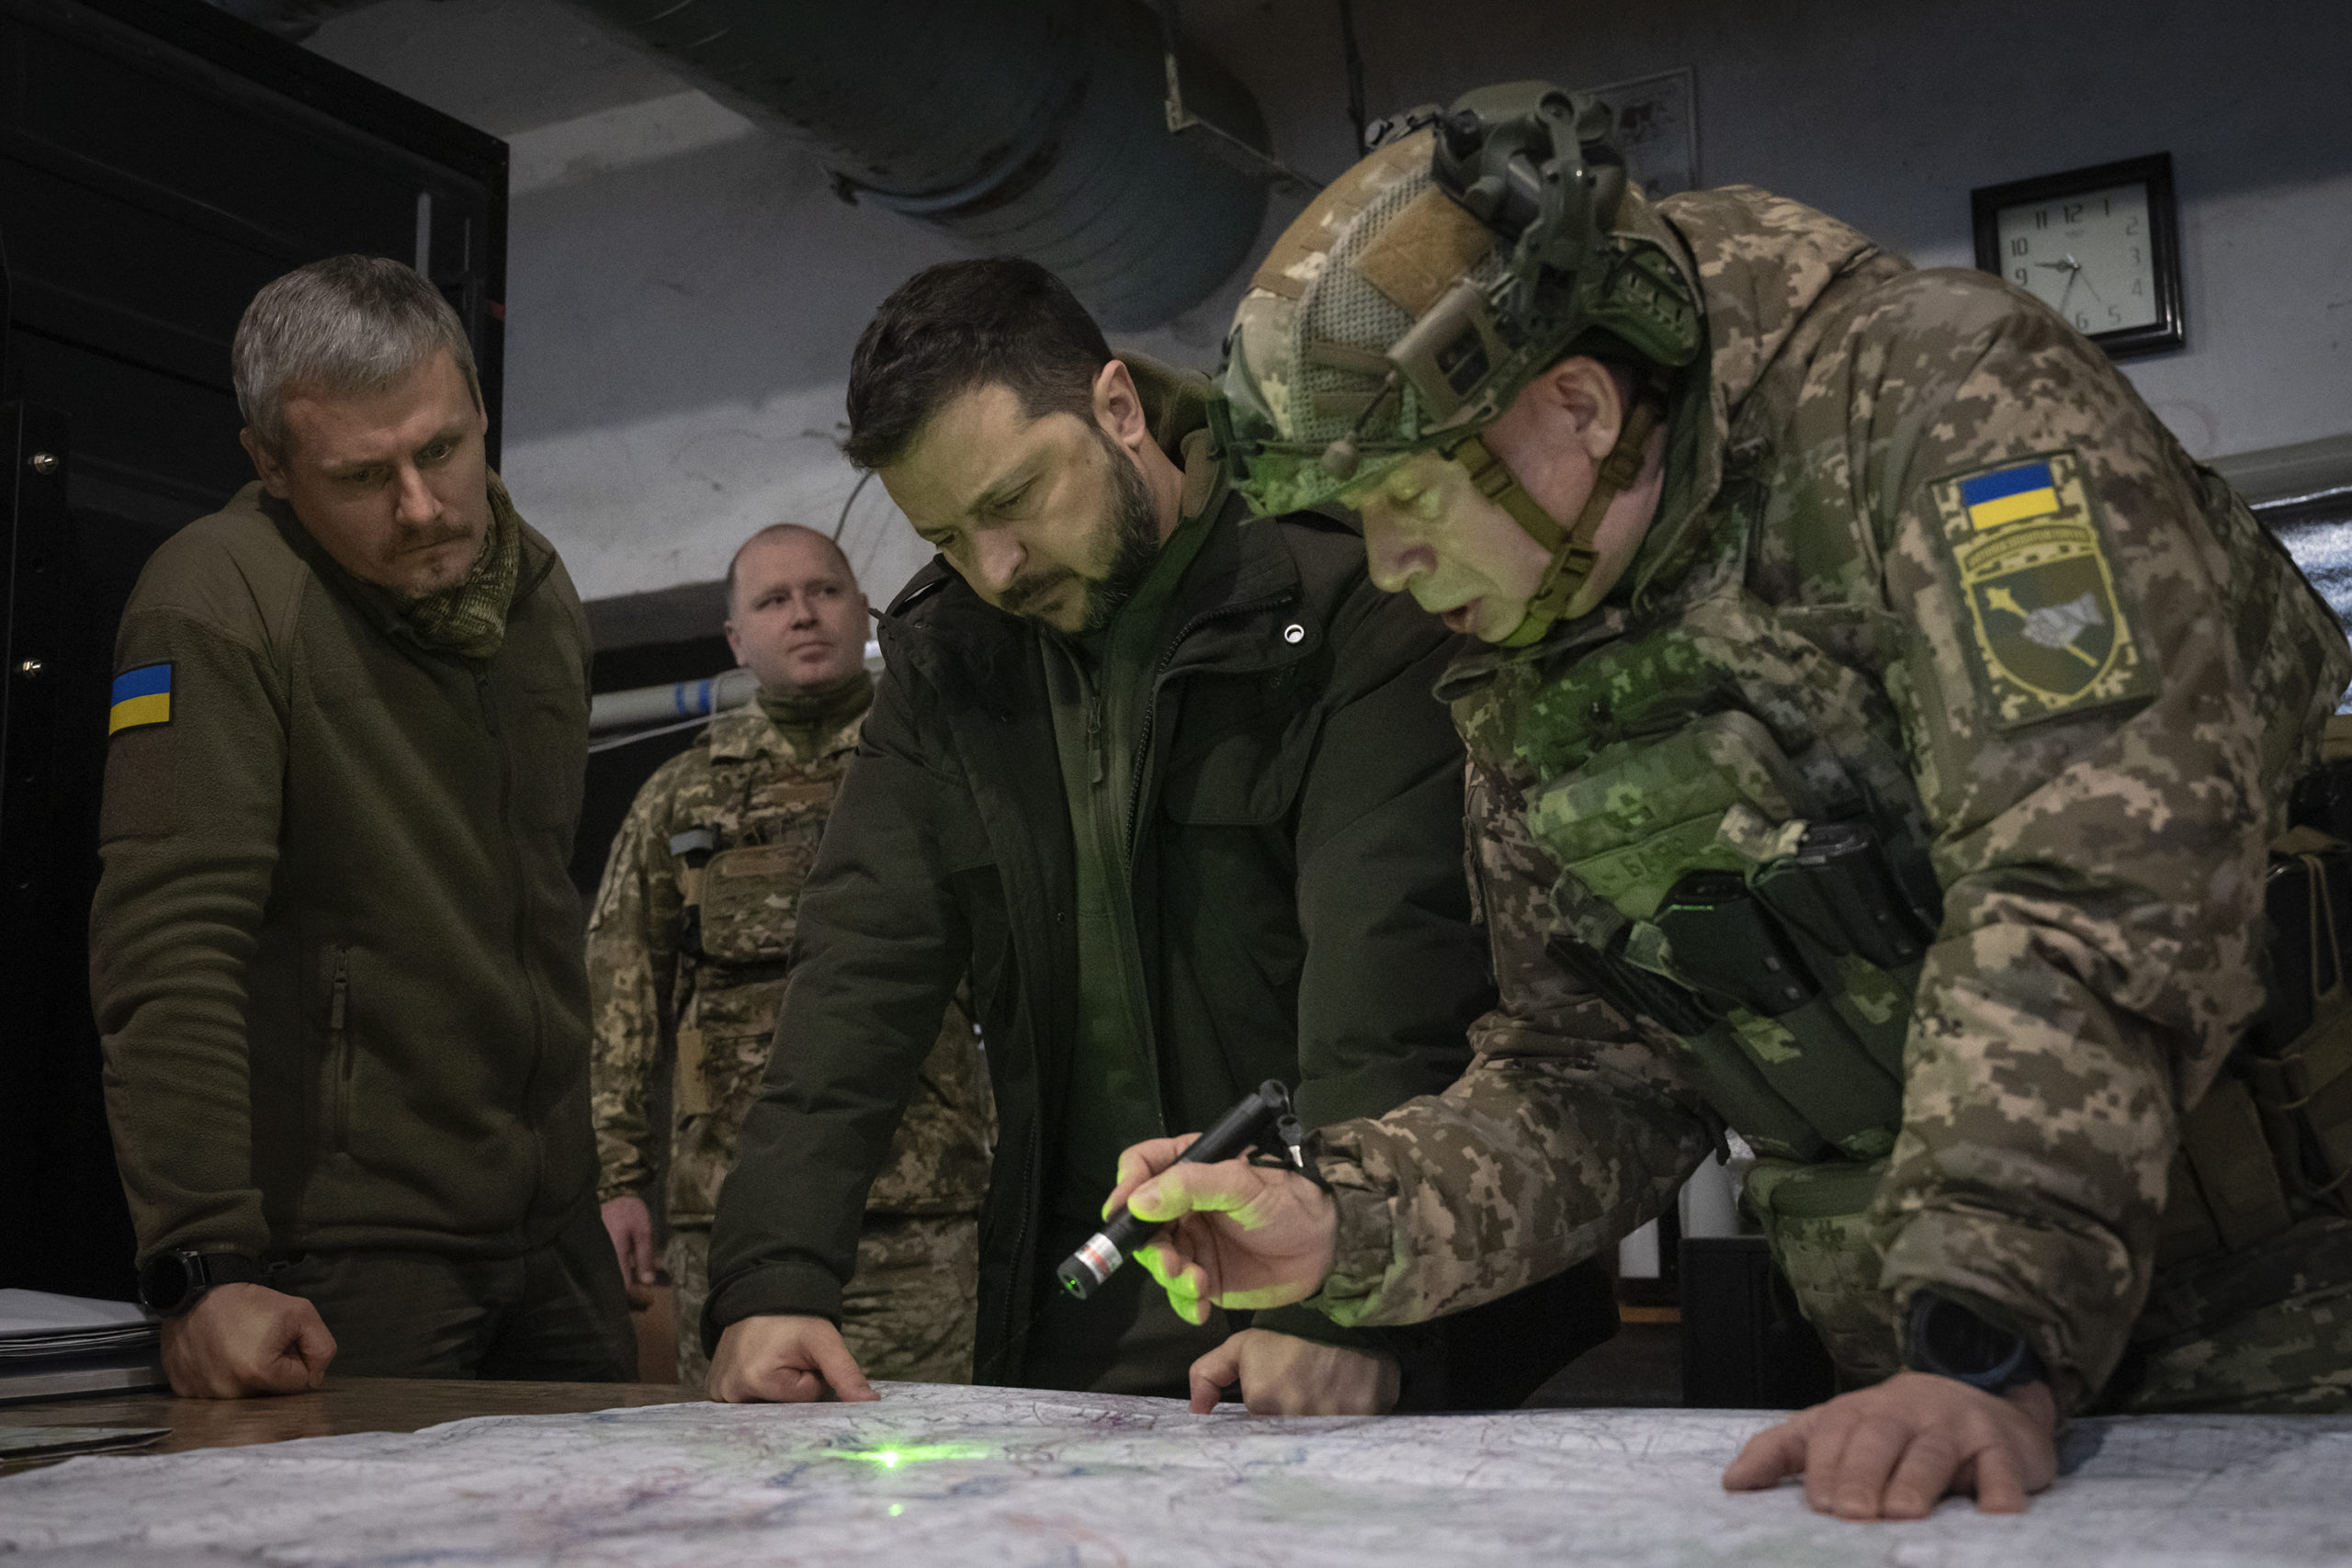 Ukrainian President Volodymyr Zelenskyy (center) and Col.-Gen. Oleksandr Syrskyi (far right) look at a map during a meeting in the front-line city of Kupiansk, Ukraine, on Nov. 30, 2023.